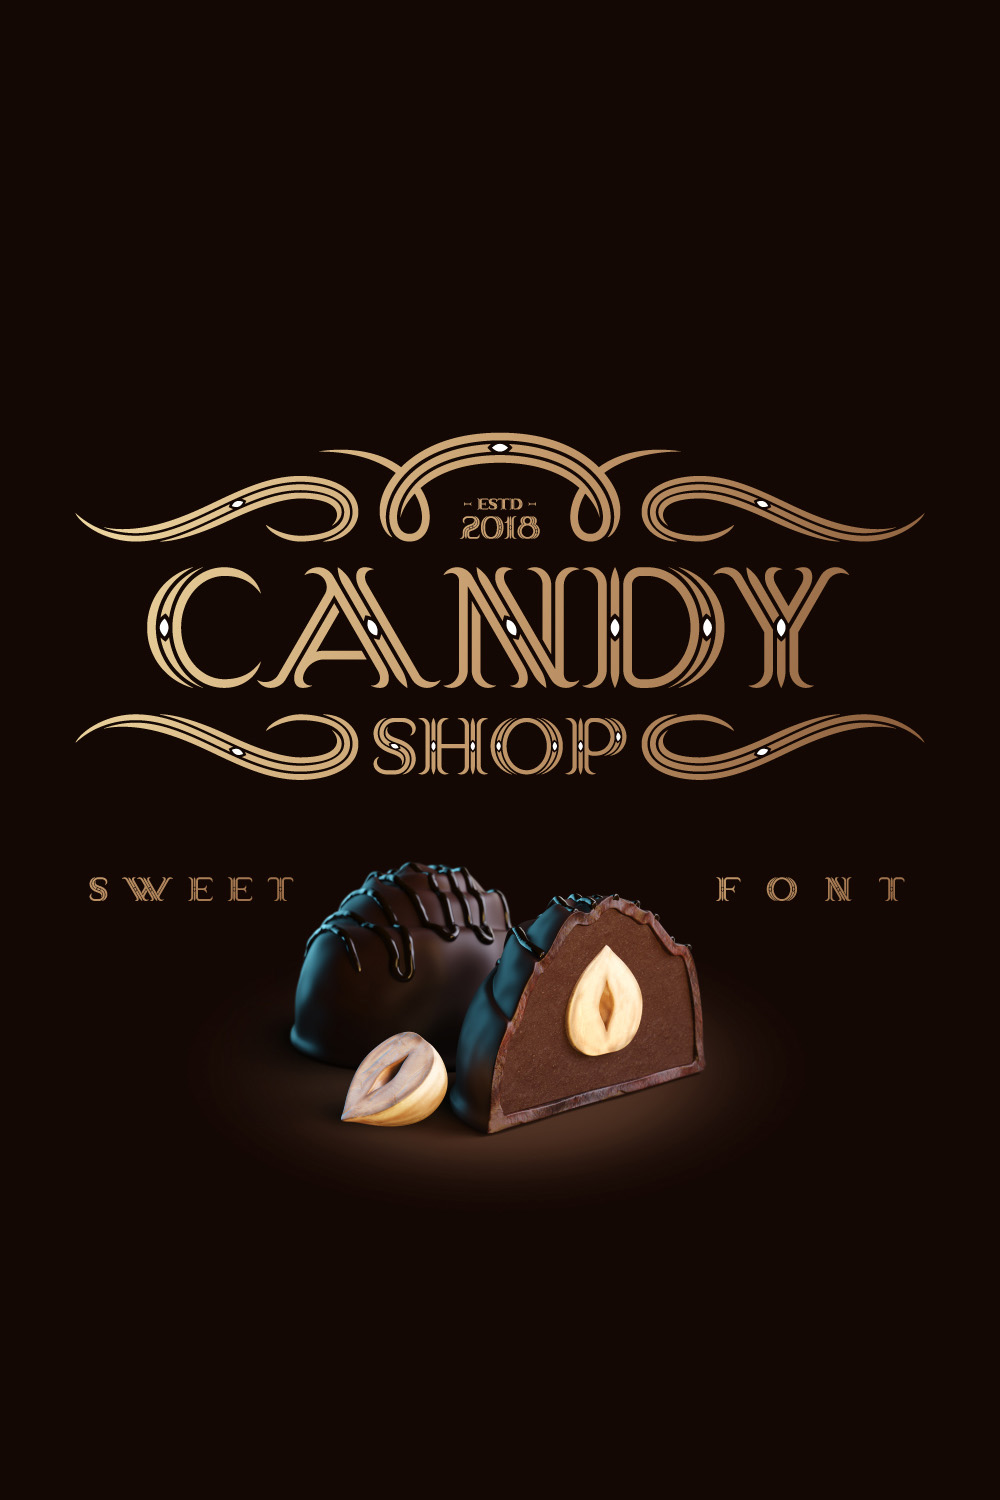 Candy Shop Font awesome Pinterest image.